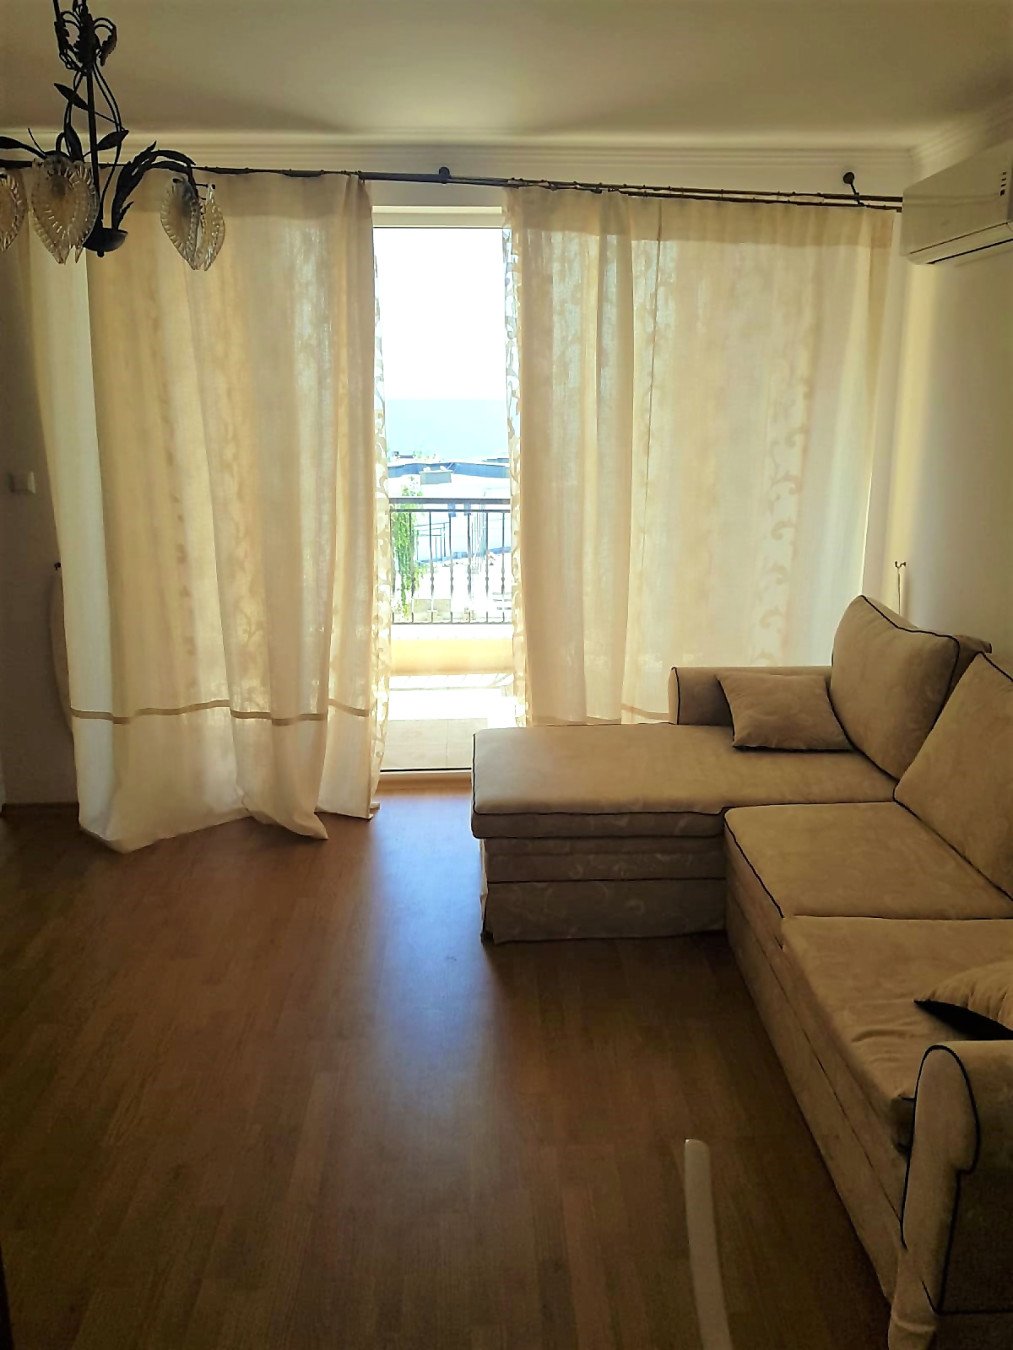 For Sale: Luxuriously furnished one-bedroom apartment with sea view